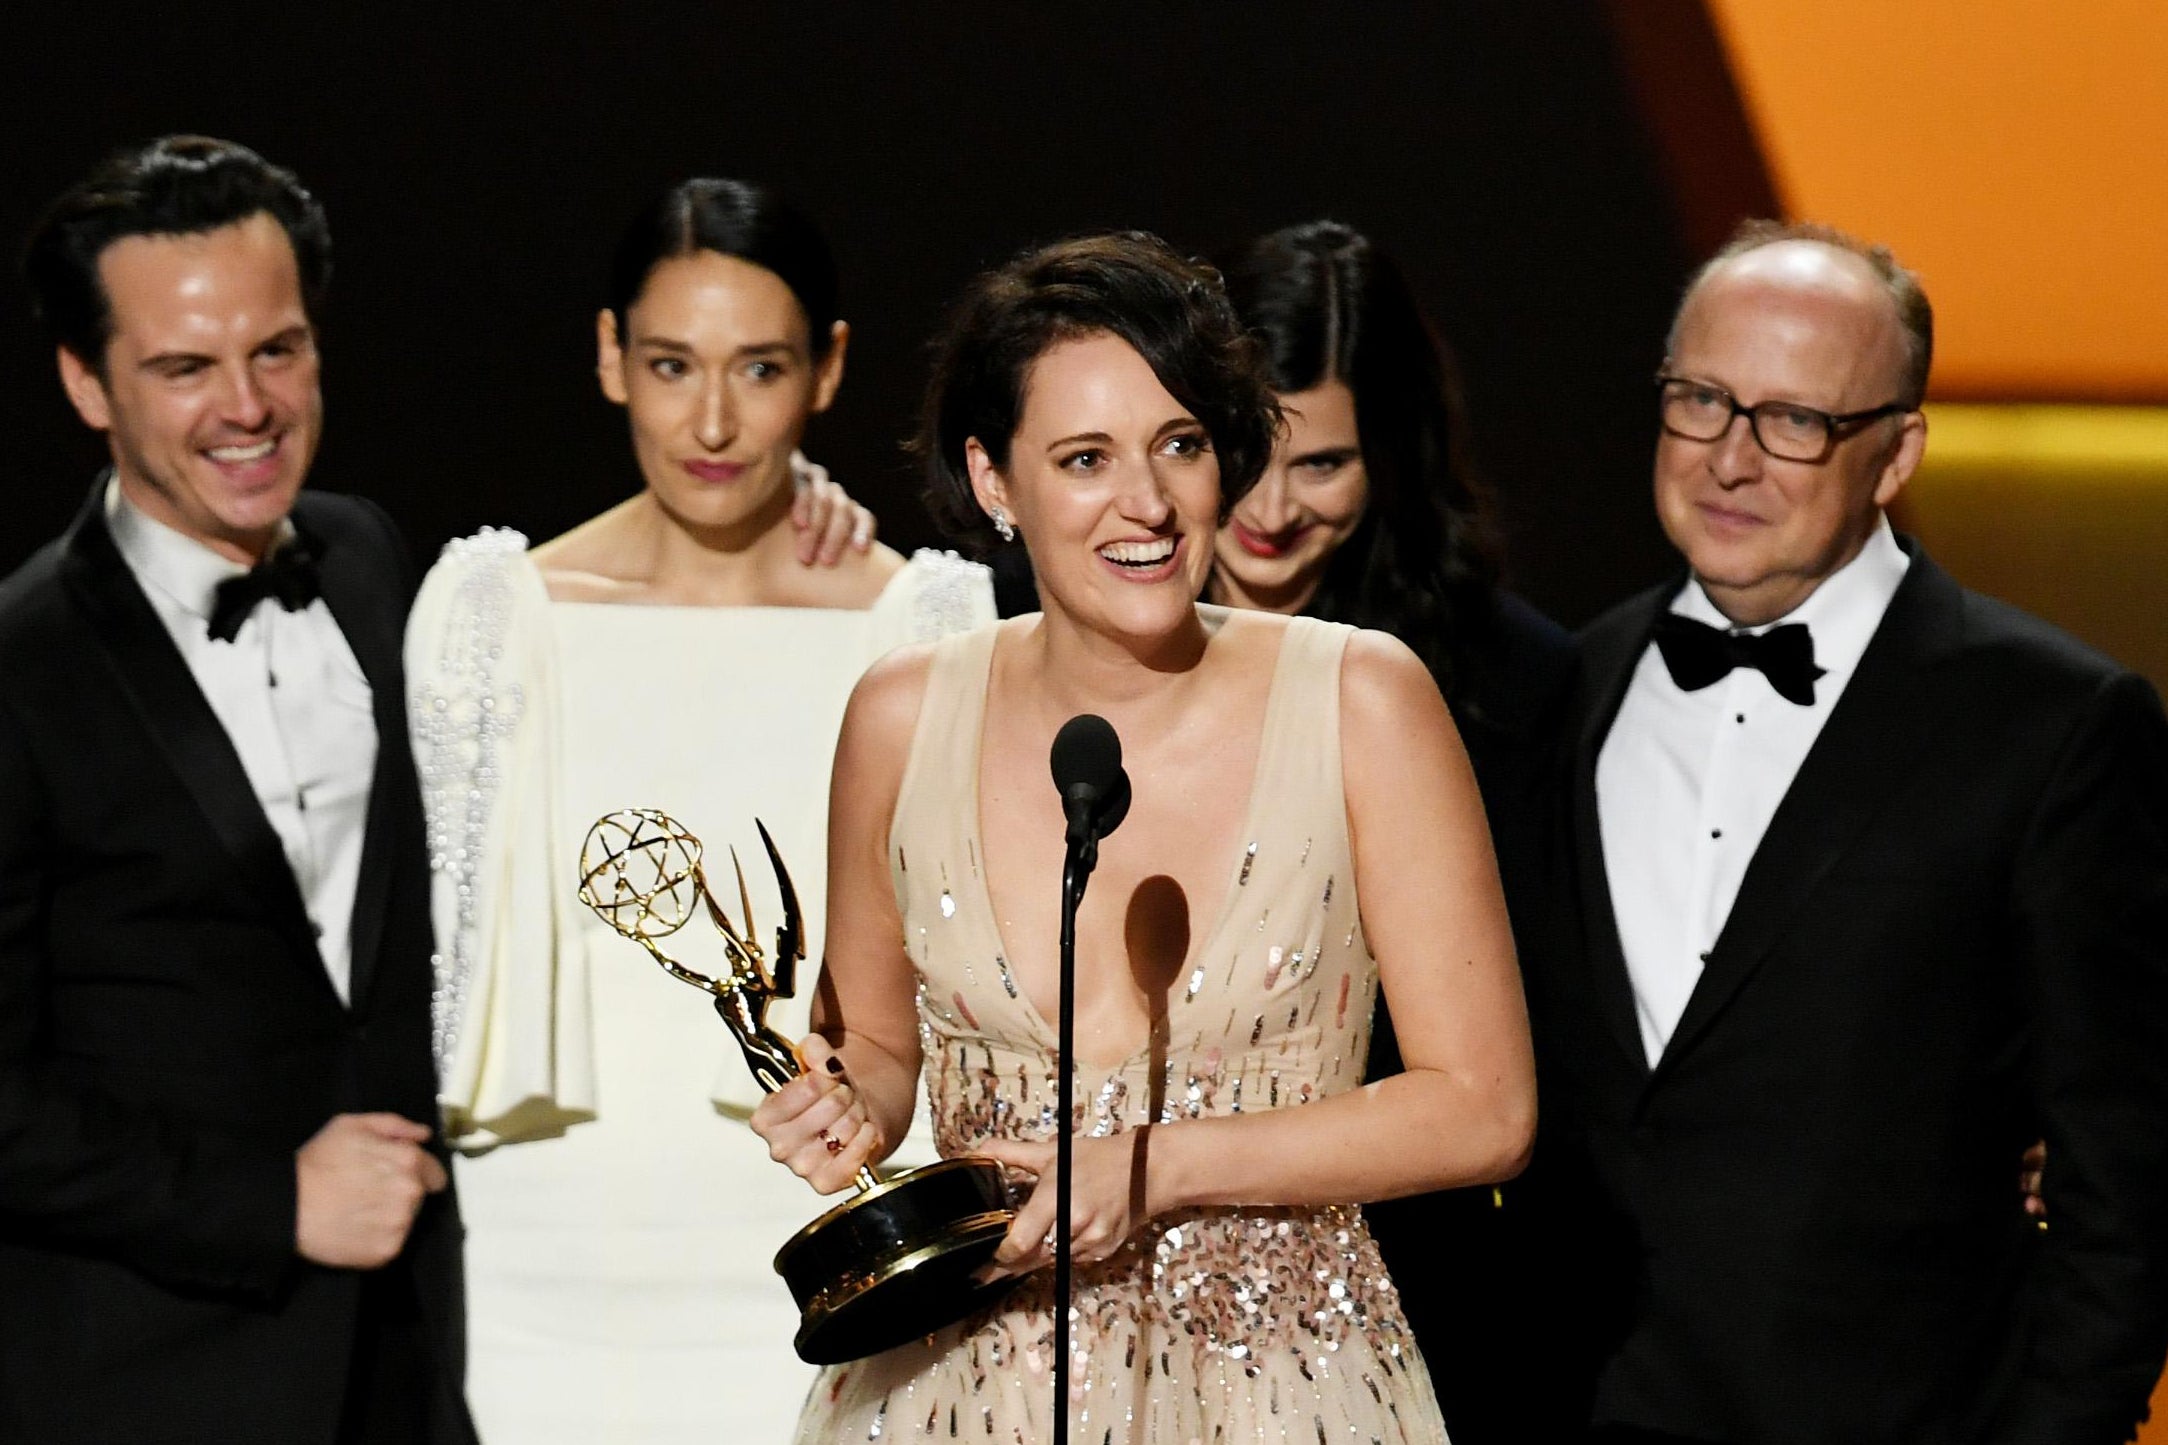 Phoebe Waller-Bridge holds a statuette and speaks into a microphone, surrounded by Fleabag castmates and crew.